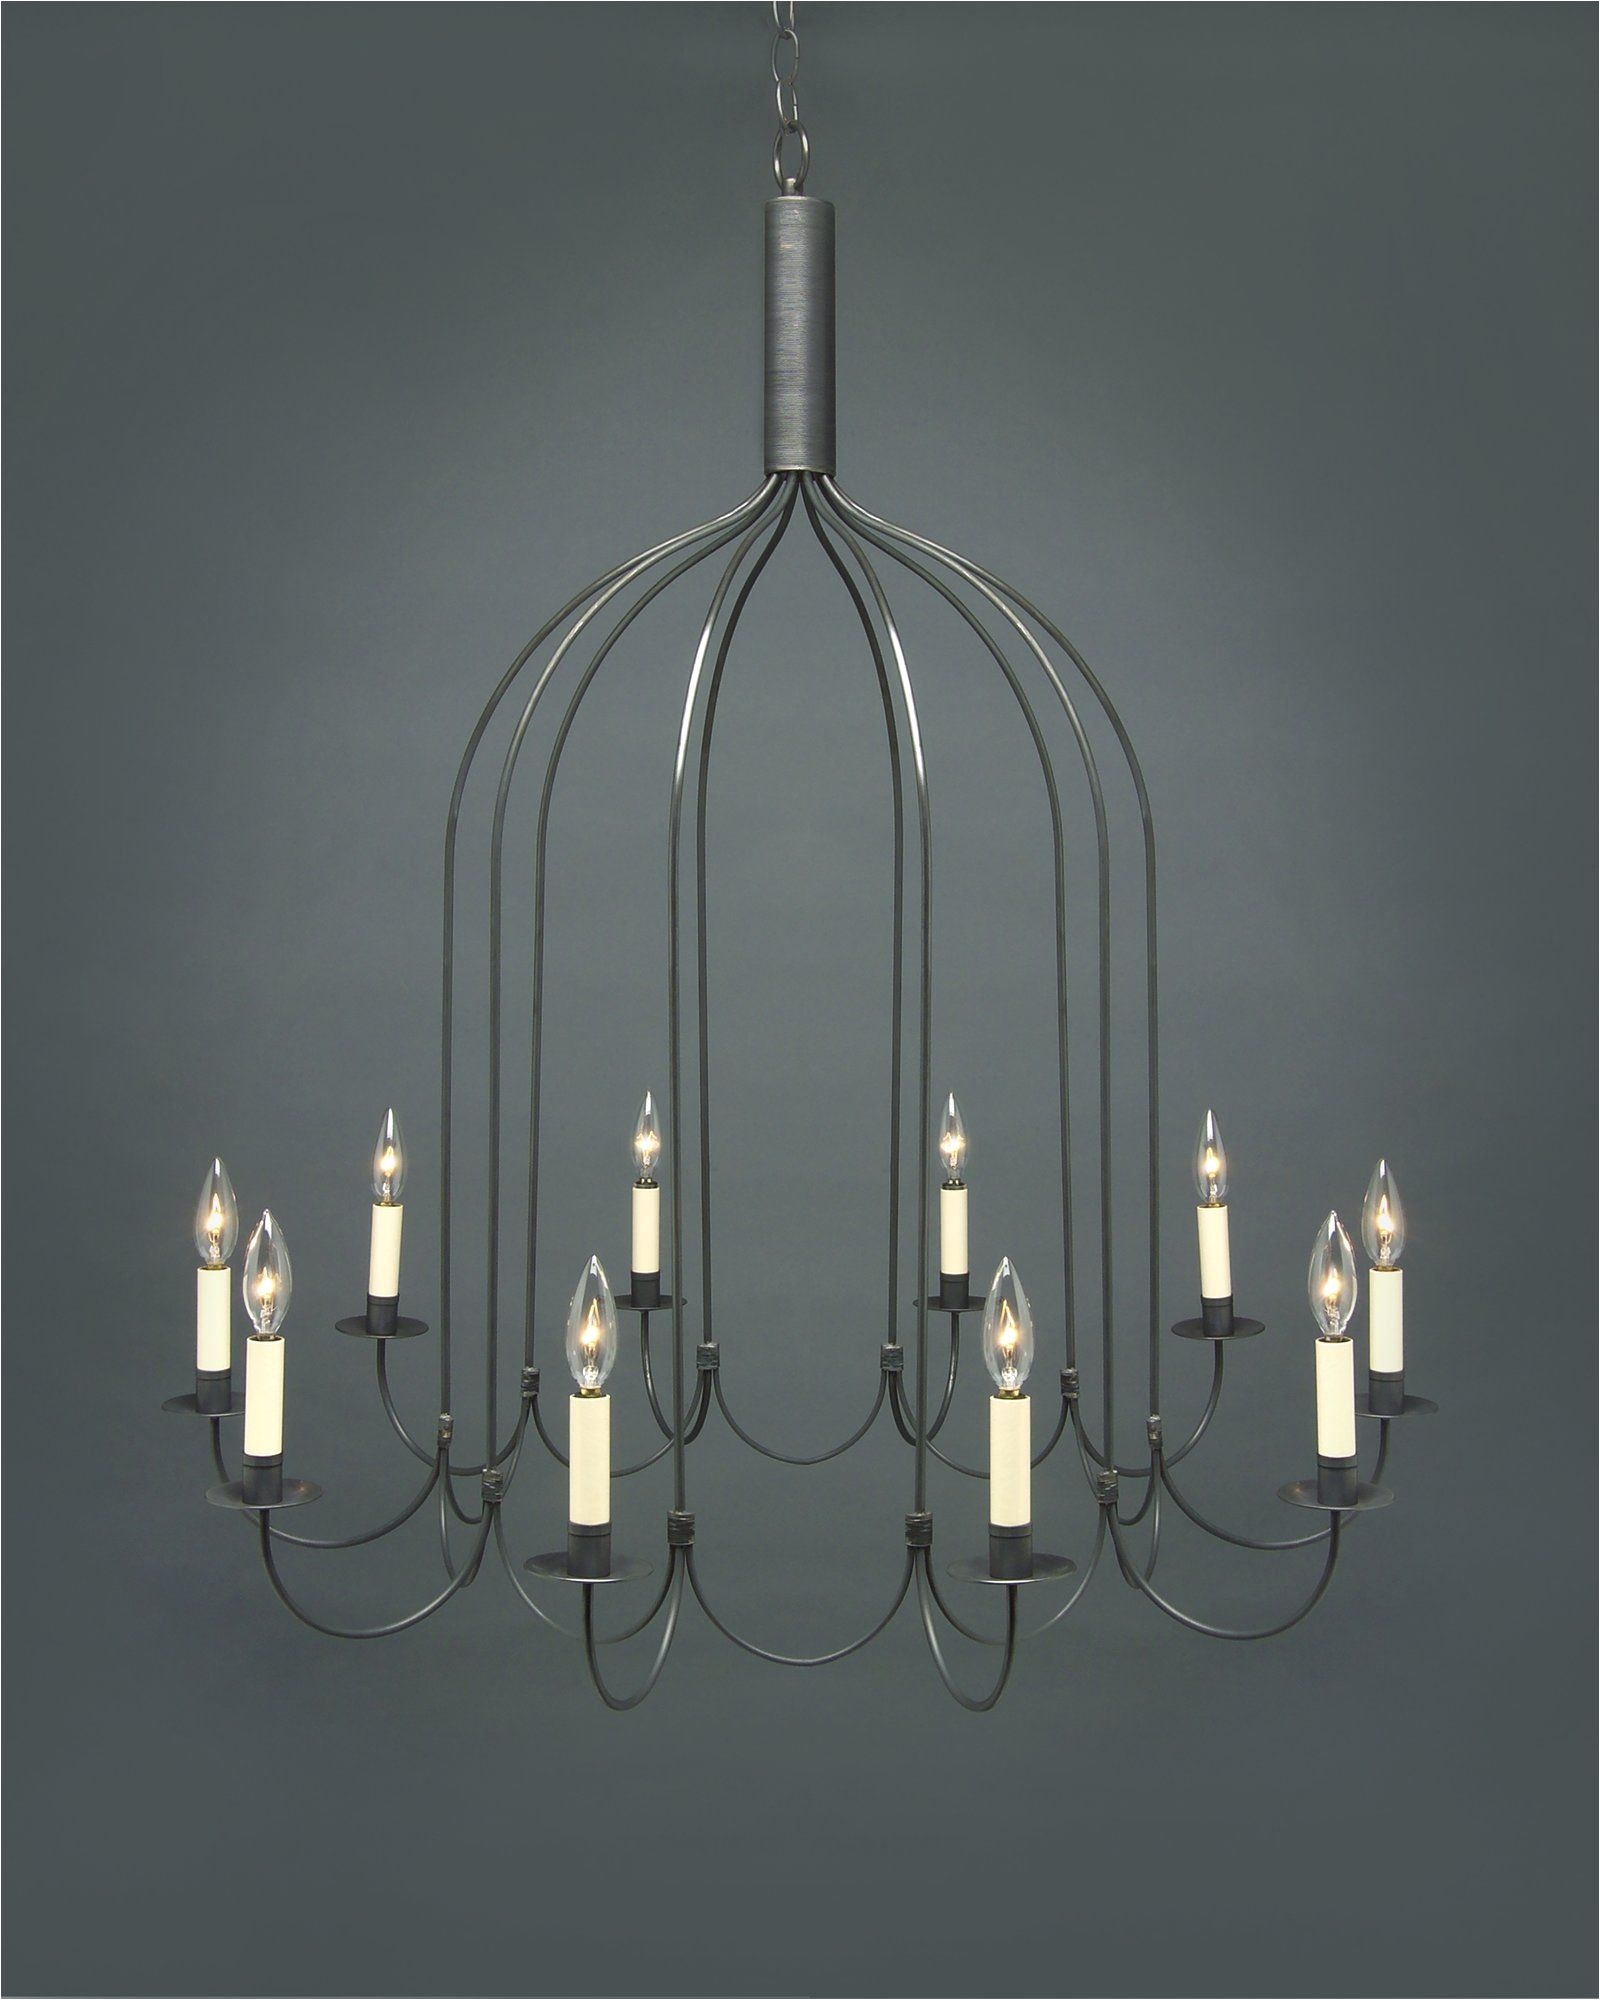 Sockets J Arms Hanging 10 Light Candle Style Chandelier